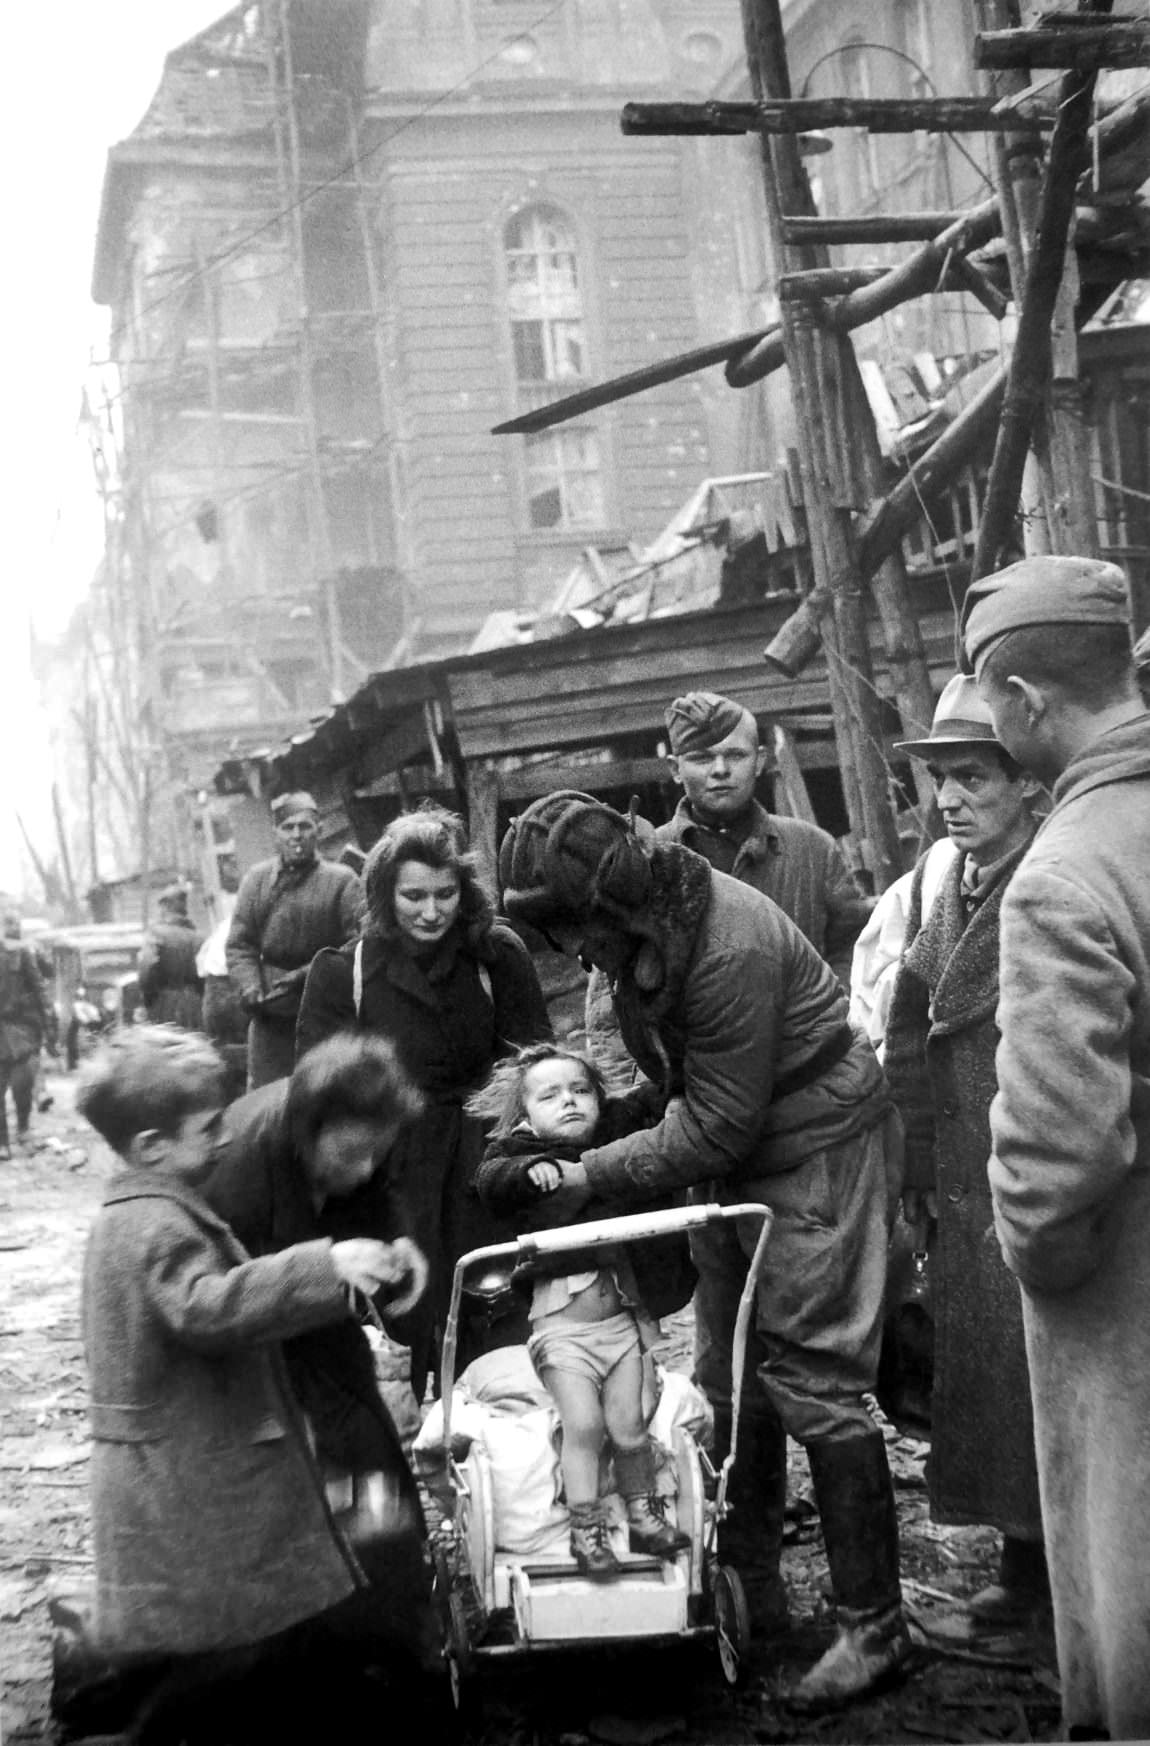 Soviet soldiers try to prop up a toddler to the mothers despair for a propaganda picture in Berlin, Germany not long after the Nazis surrendered in 1945.